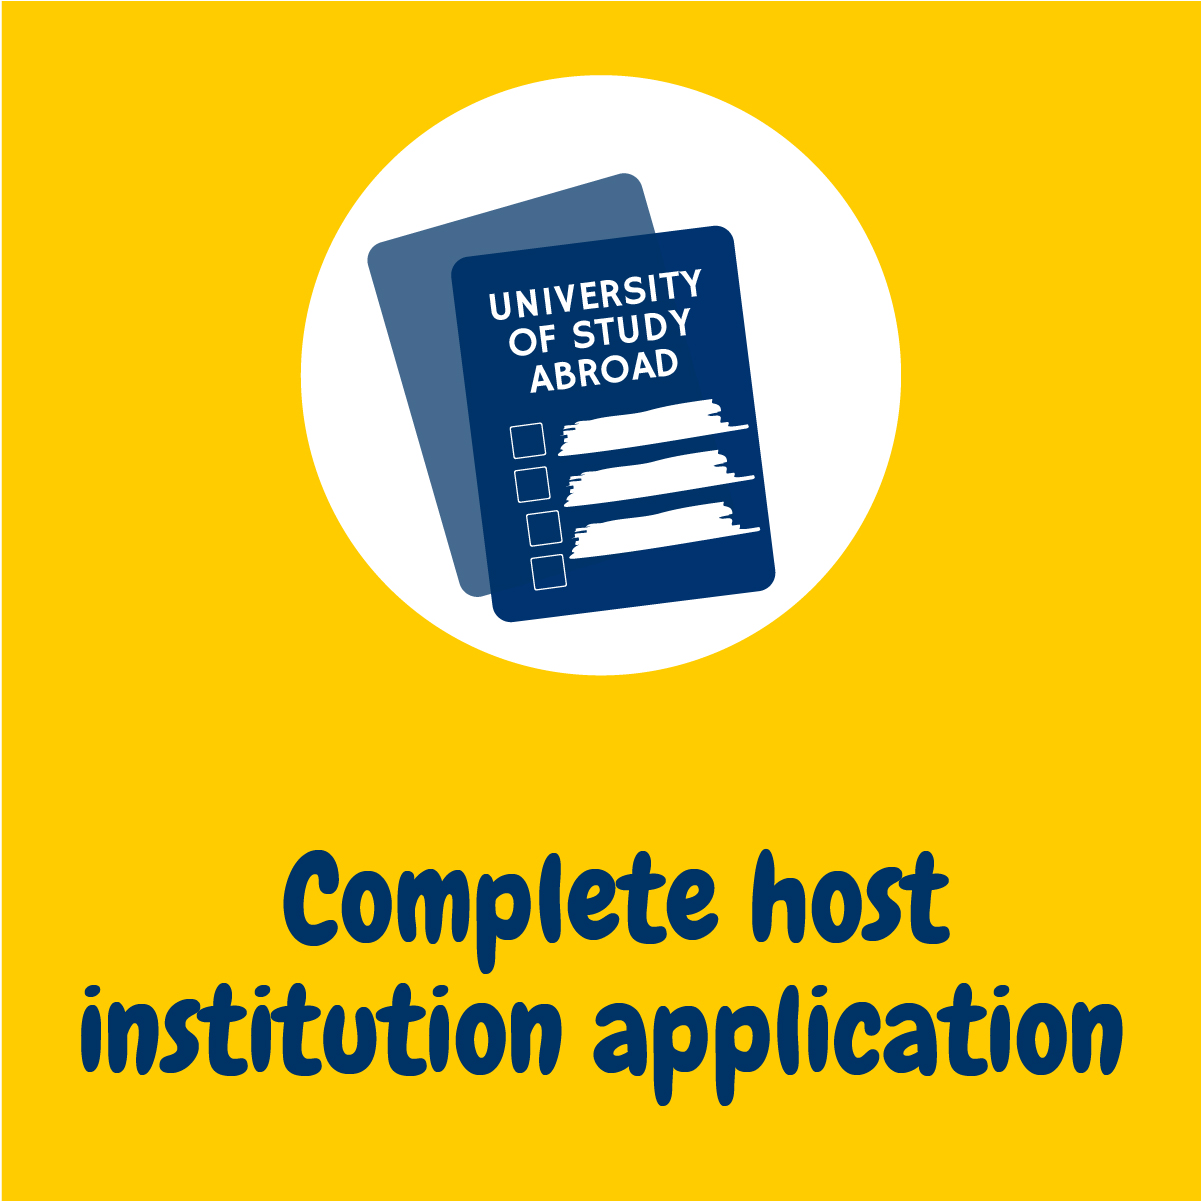 Complete host institution application